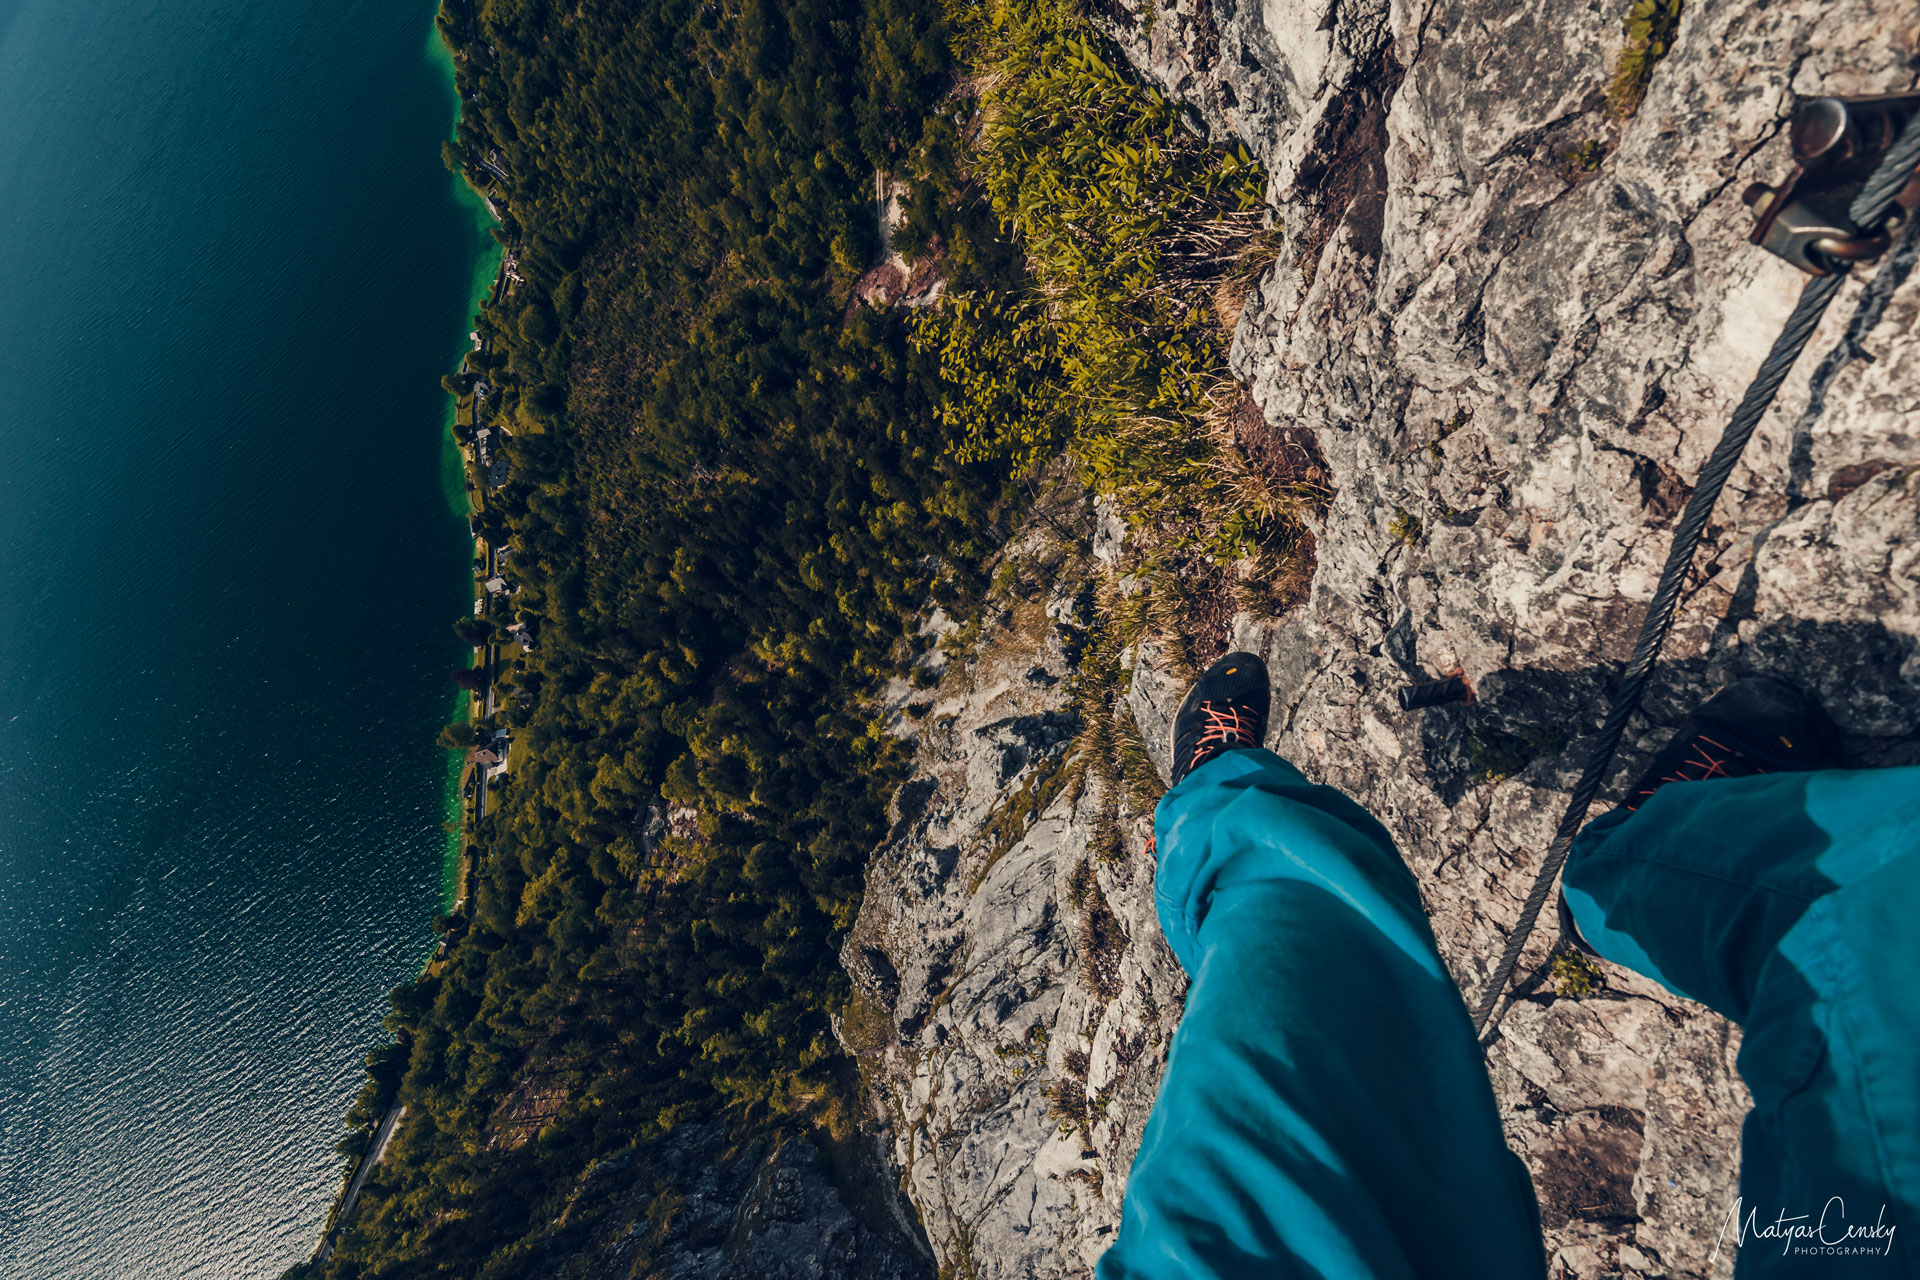 Photo of photographer/climber legs hanging from the rock wall looking down on Attersee.